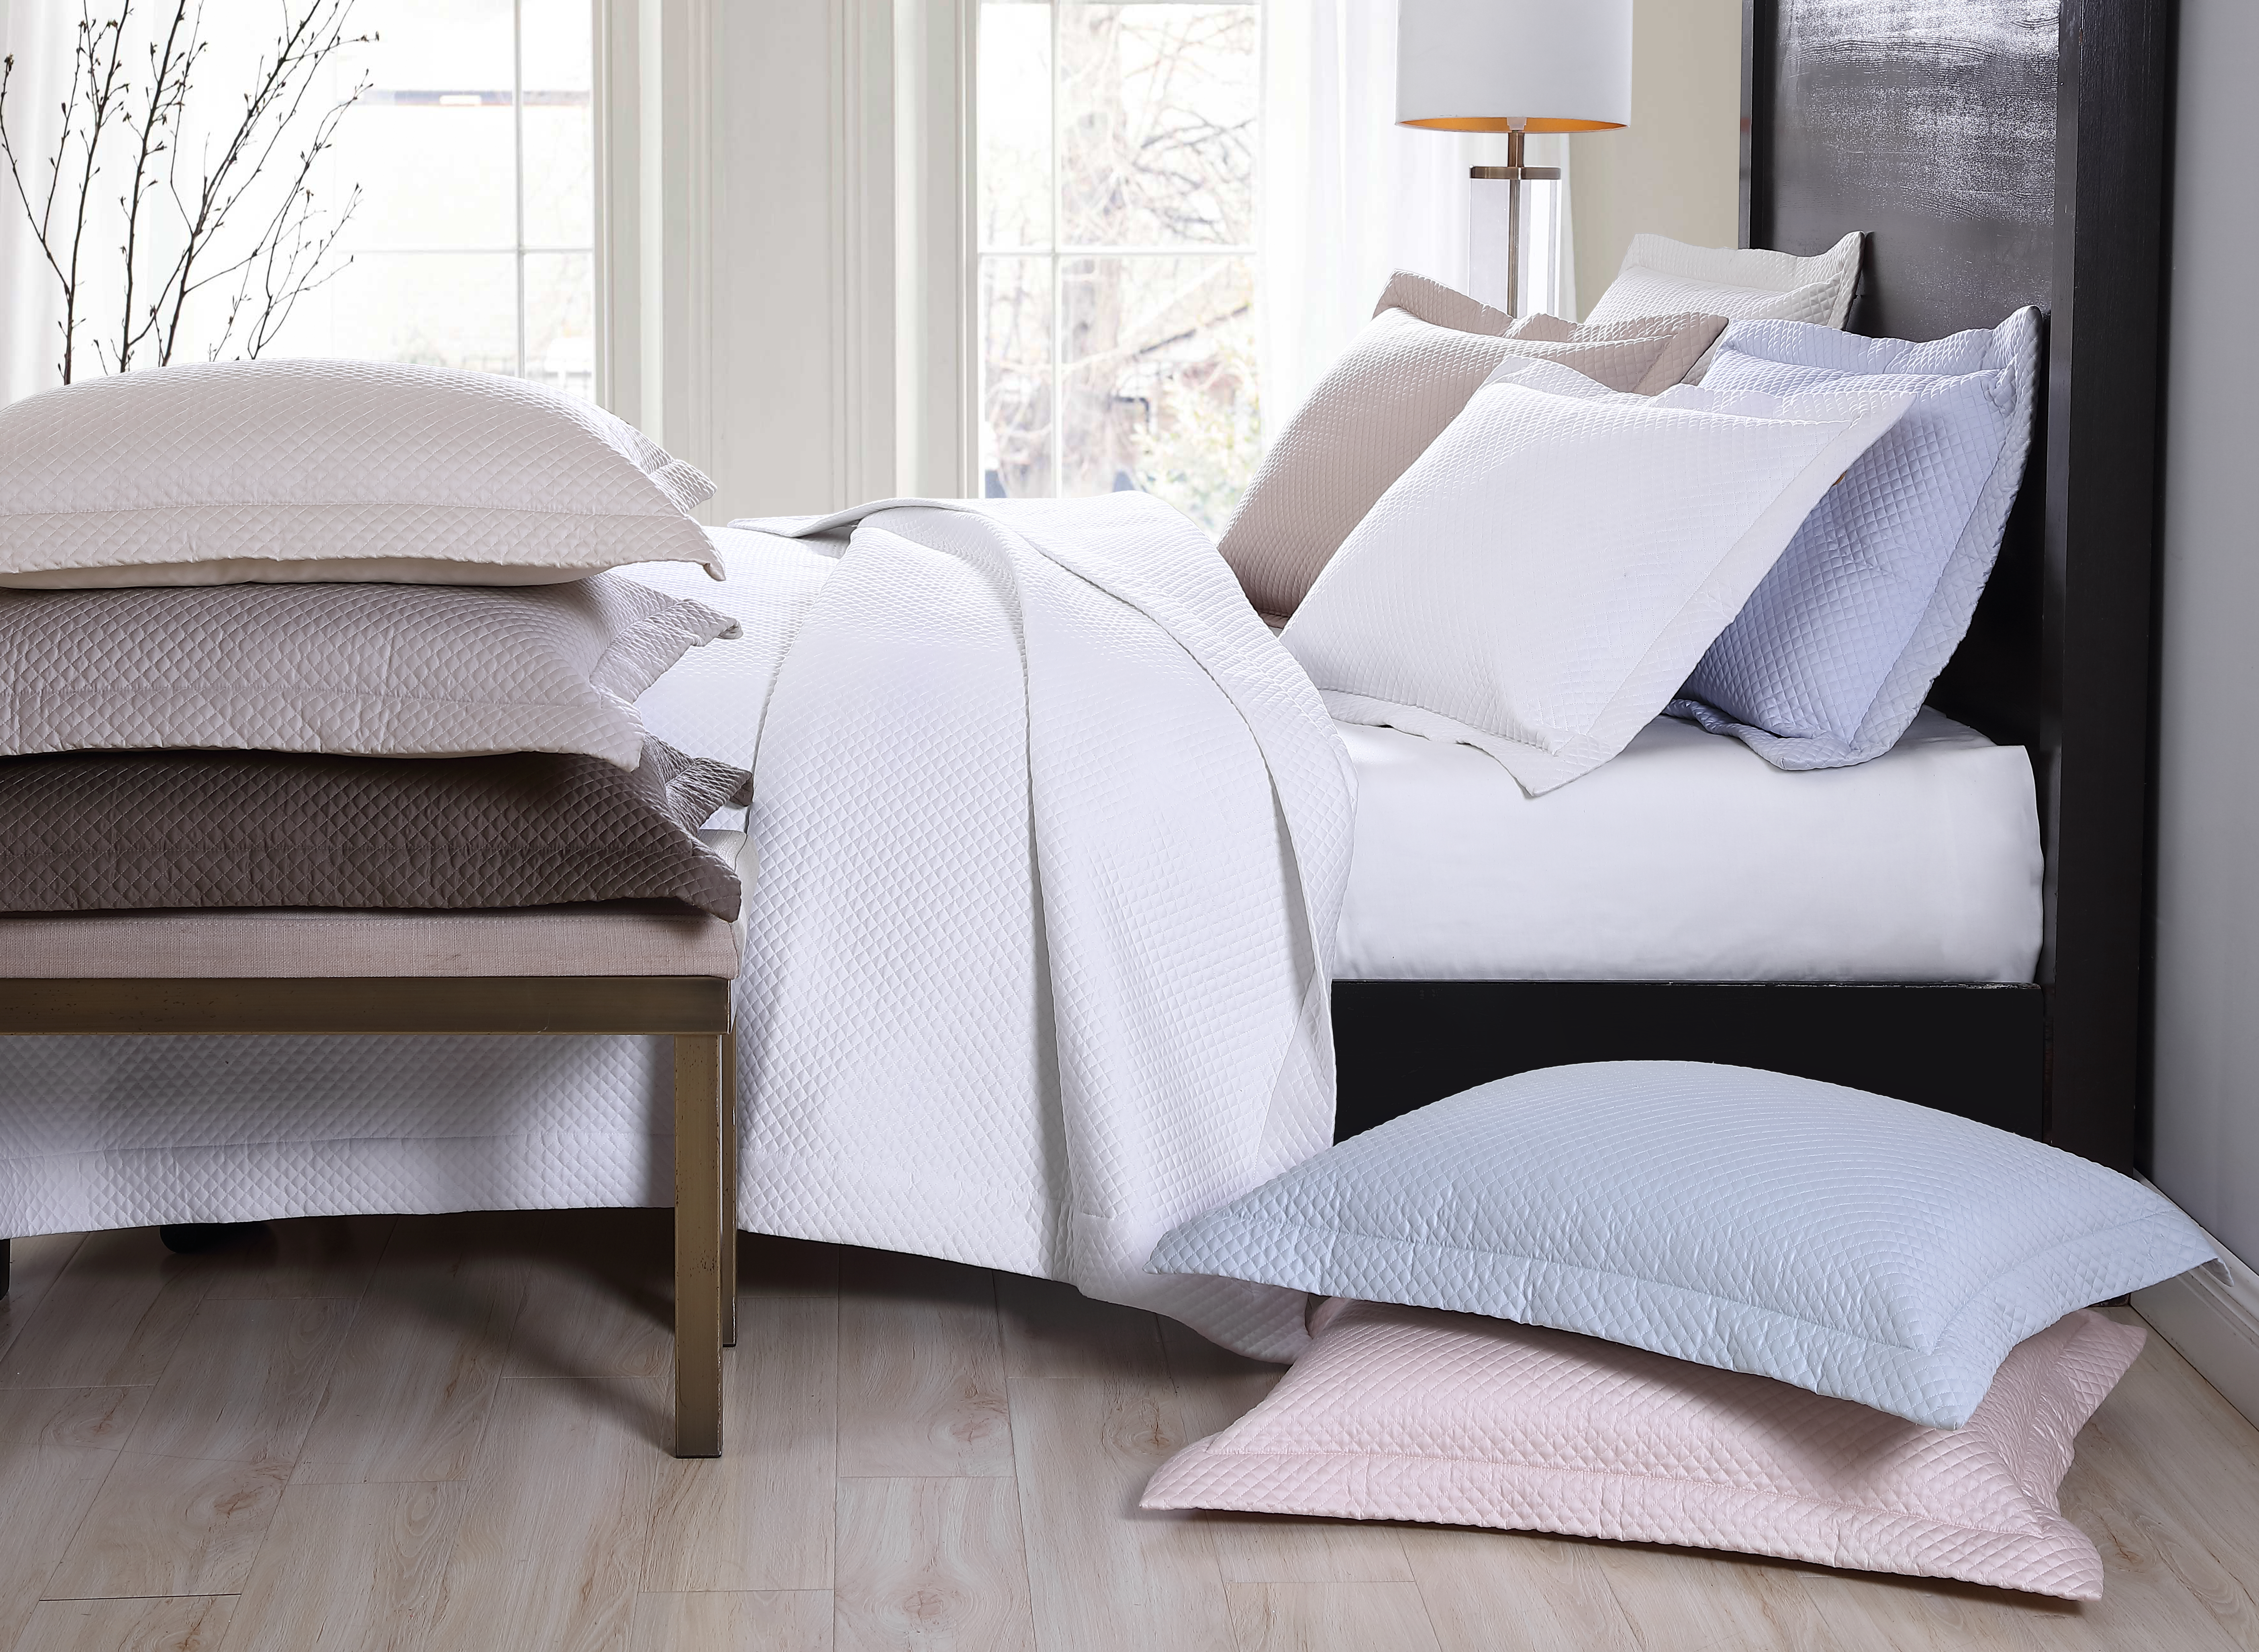 sunshine from a window spills onto a modern bed frame made of wood made with fresh crisp white bedding and several pillows in different shades of blue, beige, pink and white